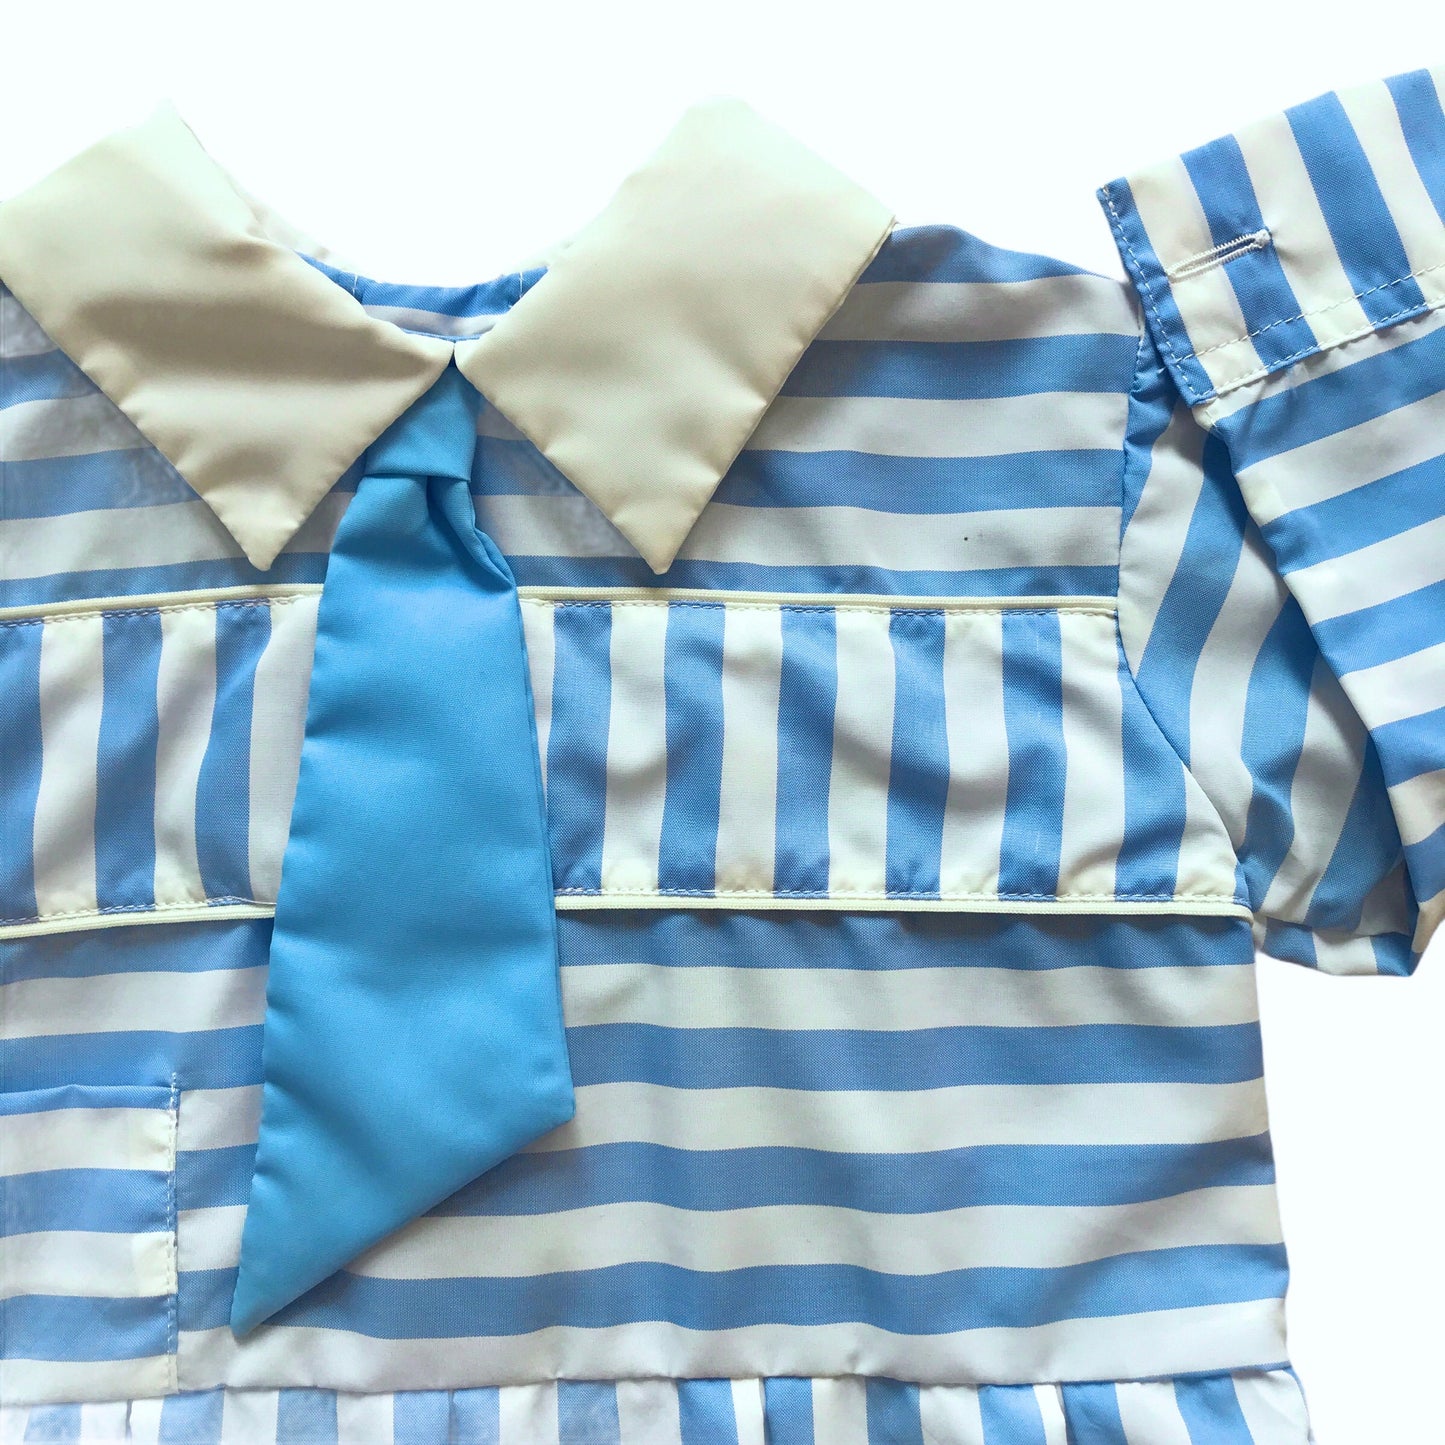 Vintage 60s Baby White / Blue Nylon Dress/Blouse  French Made 6-9 Months